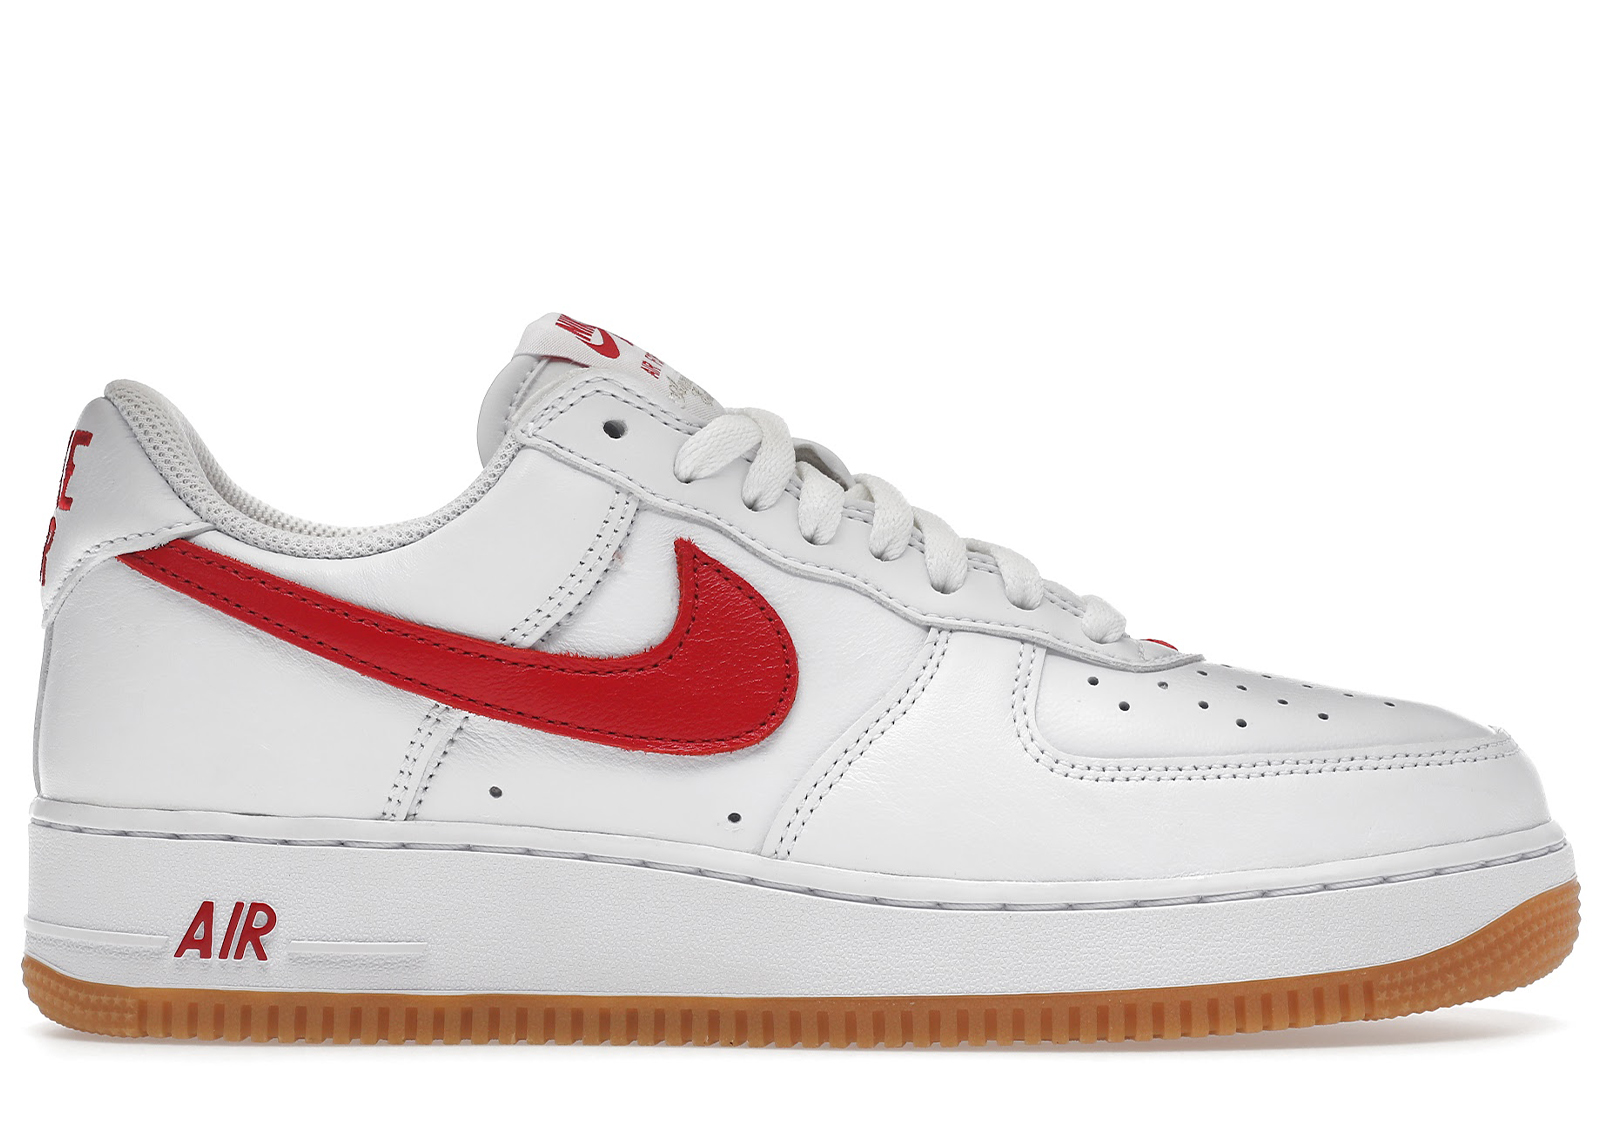 AIR FORCES 1 LOW Color of the Month 赤色